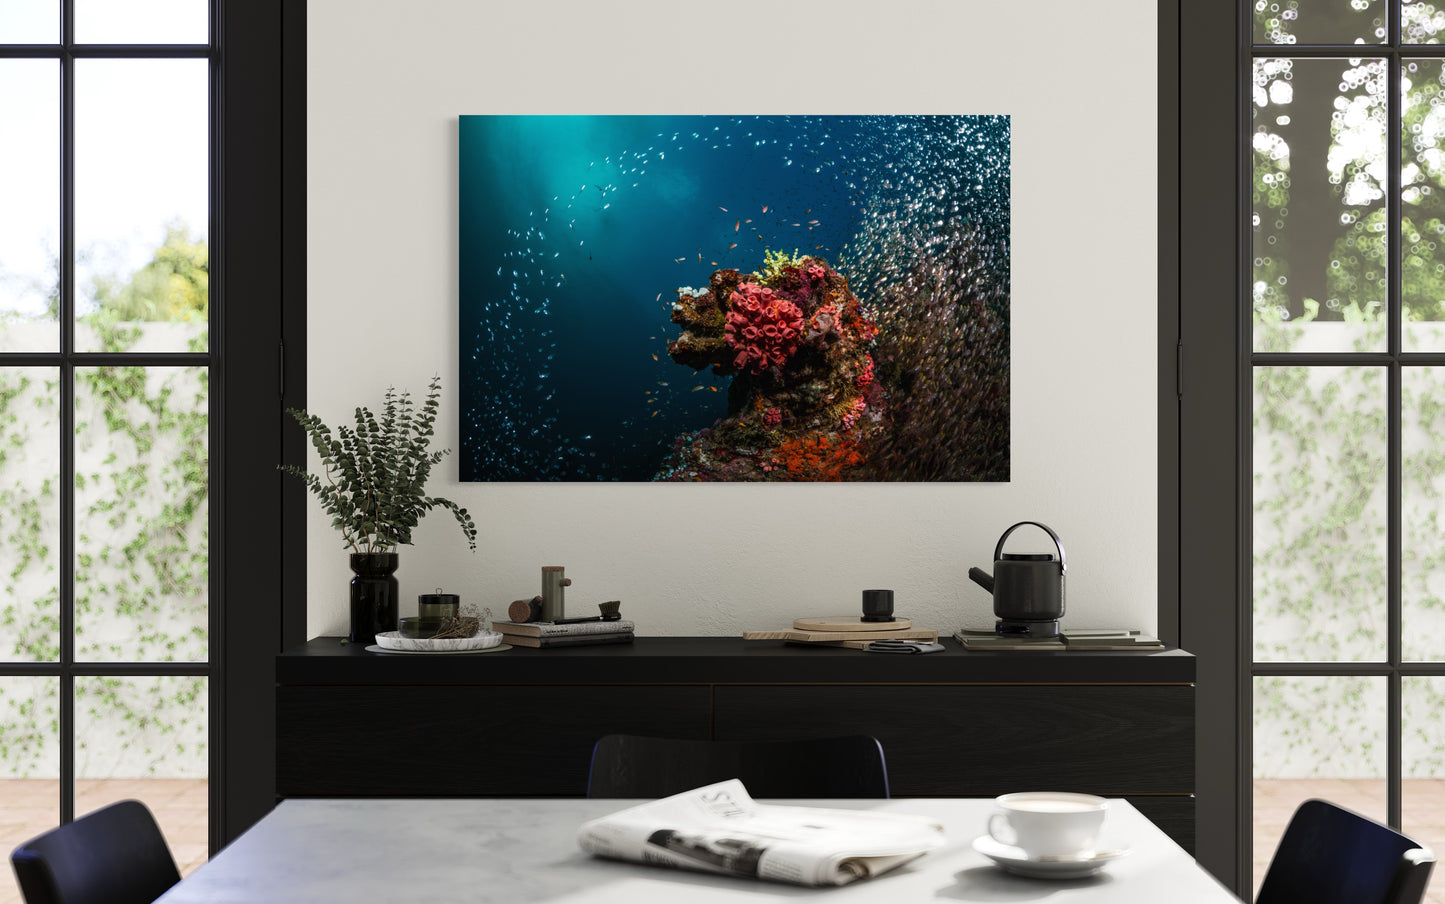 Fine art print: Aqua Ballet: The Dynamic Life of the Coral Reef